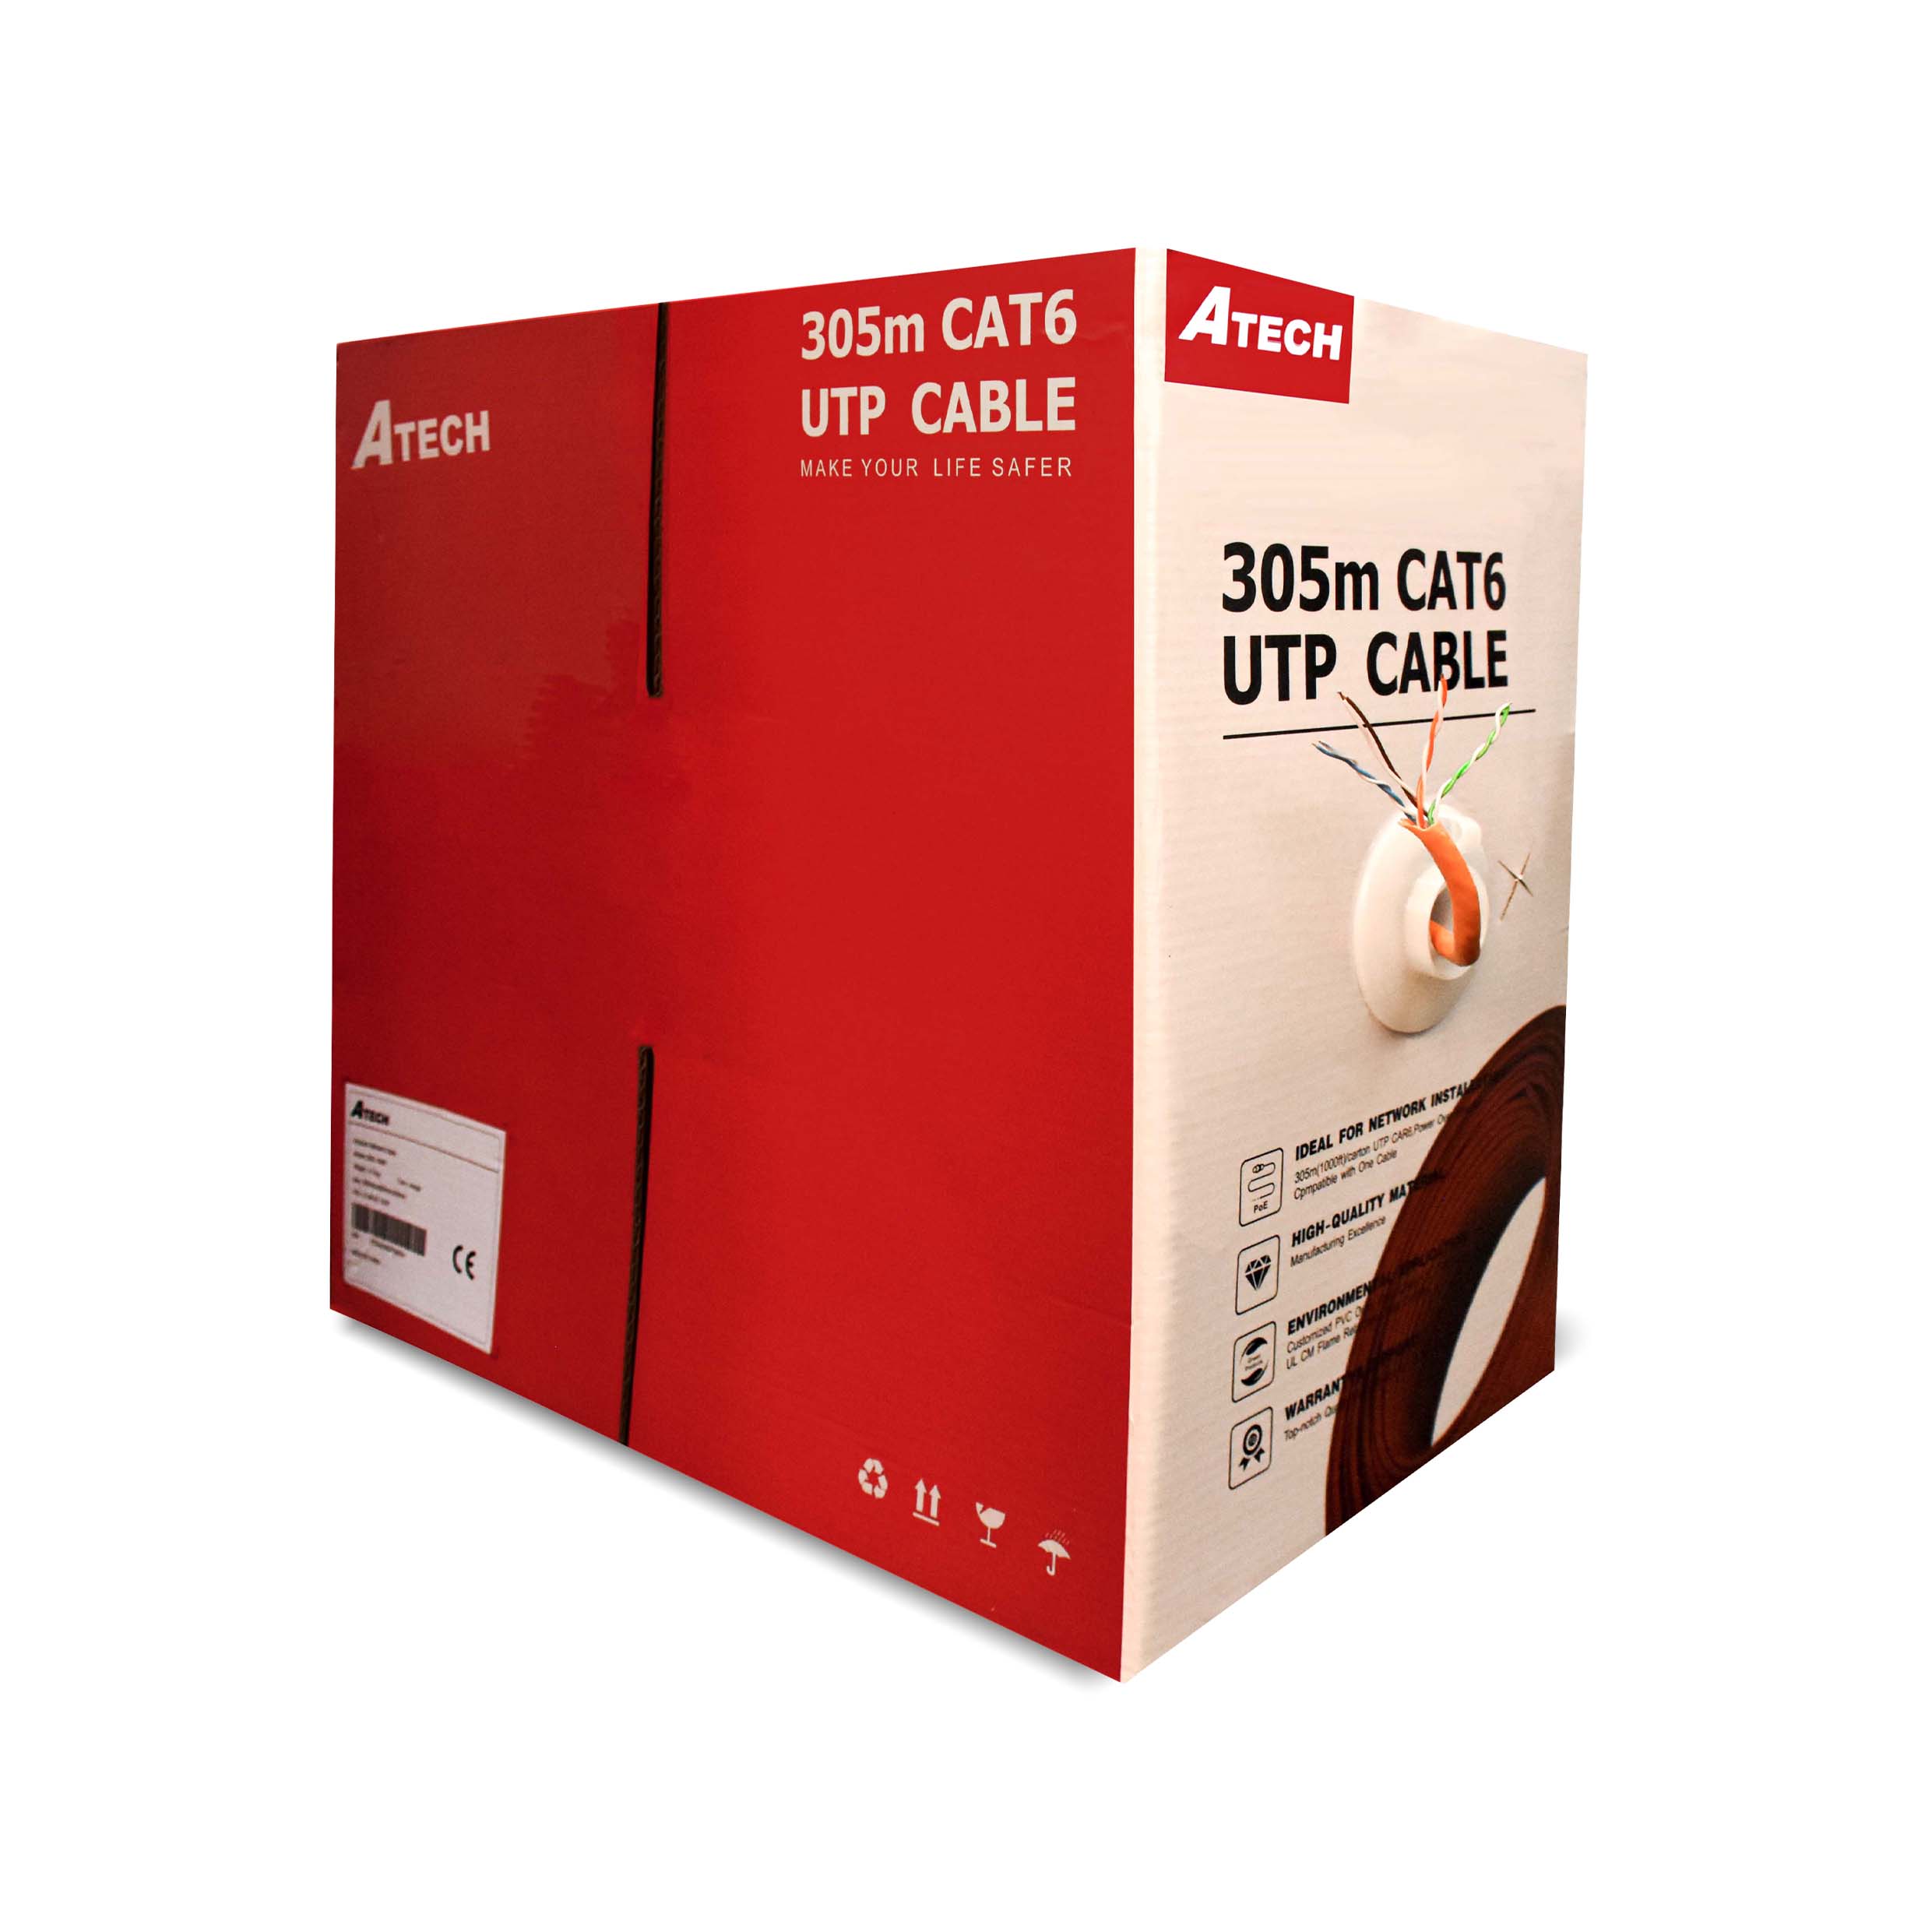 ATECH AT-CNW-0920-O 305m CAT6 UTP Network Cable